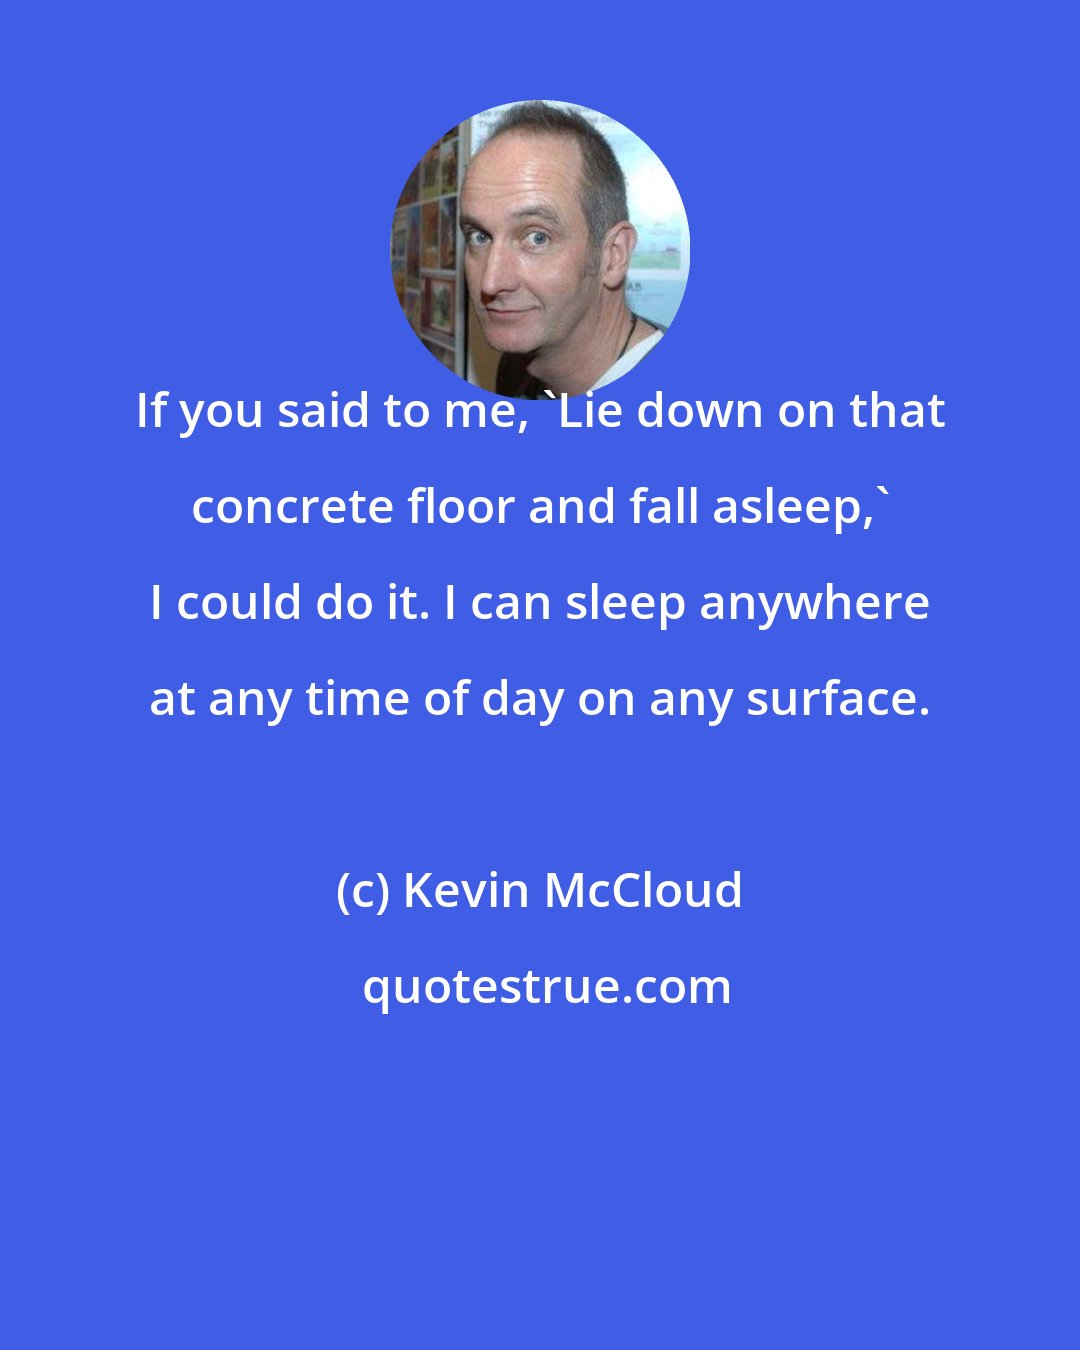 Kevin McCloud: If you said to me, 'Lie down on that concrete floor and fall asleep,' I could do it. I can sleep anywhere at any time of day on any surface.